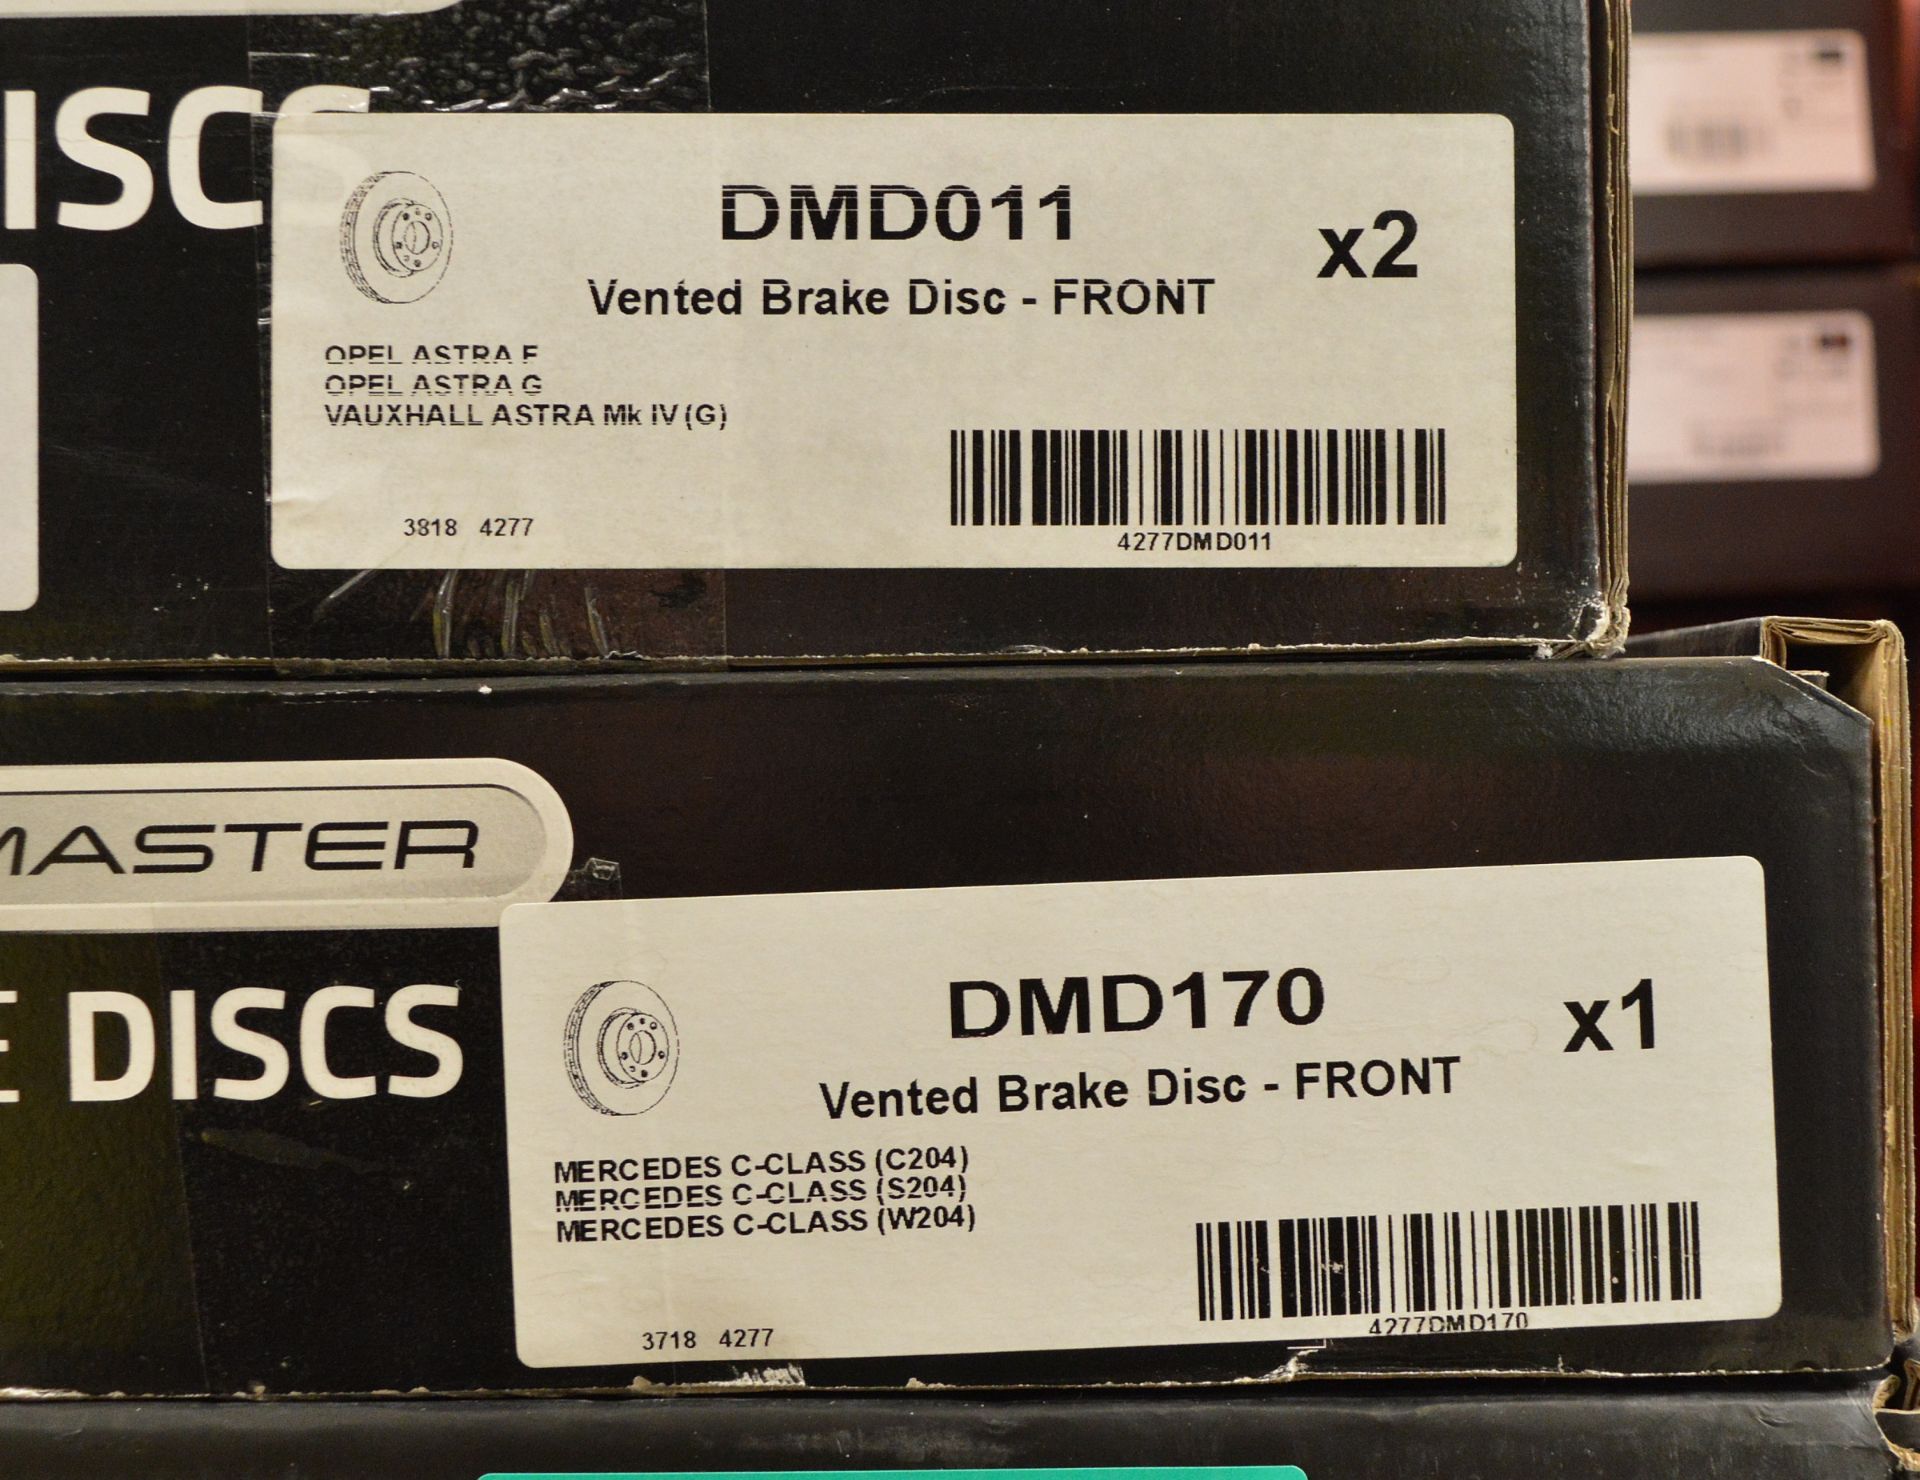 DriveMaster Brake Discs - See photos for part numbers - Image 9 of 10